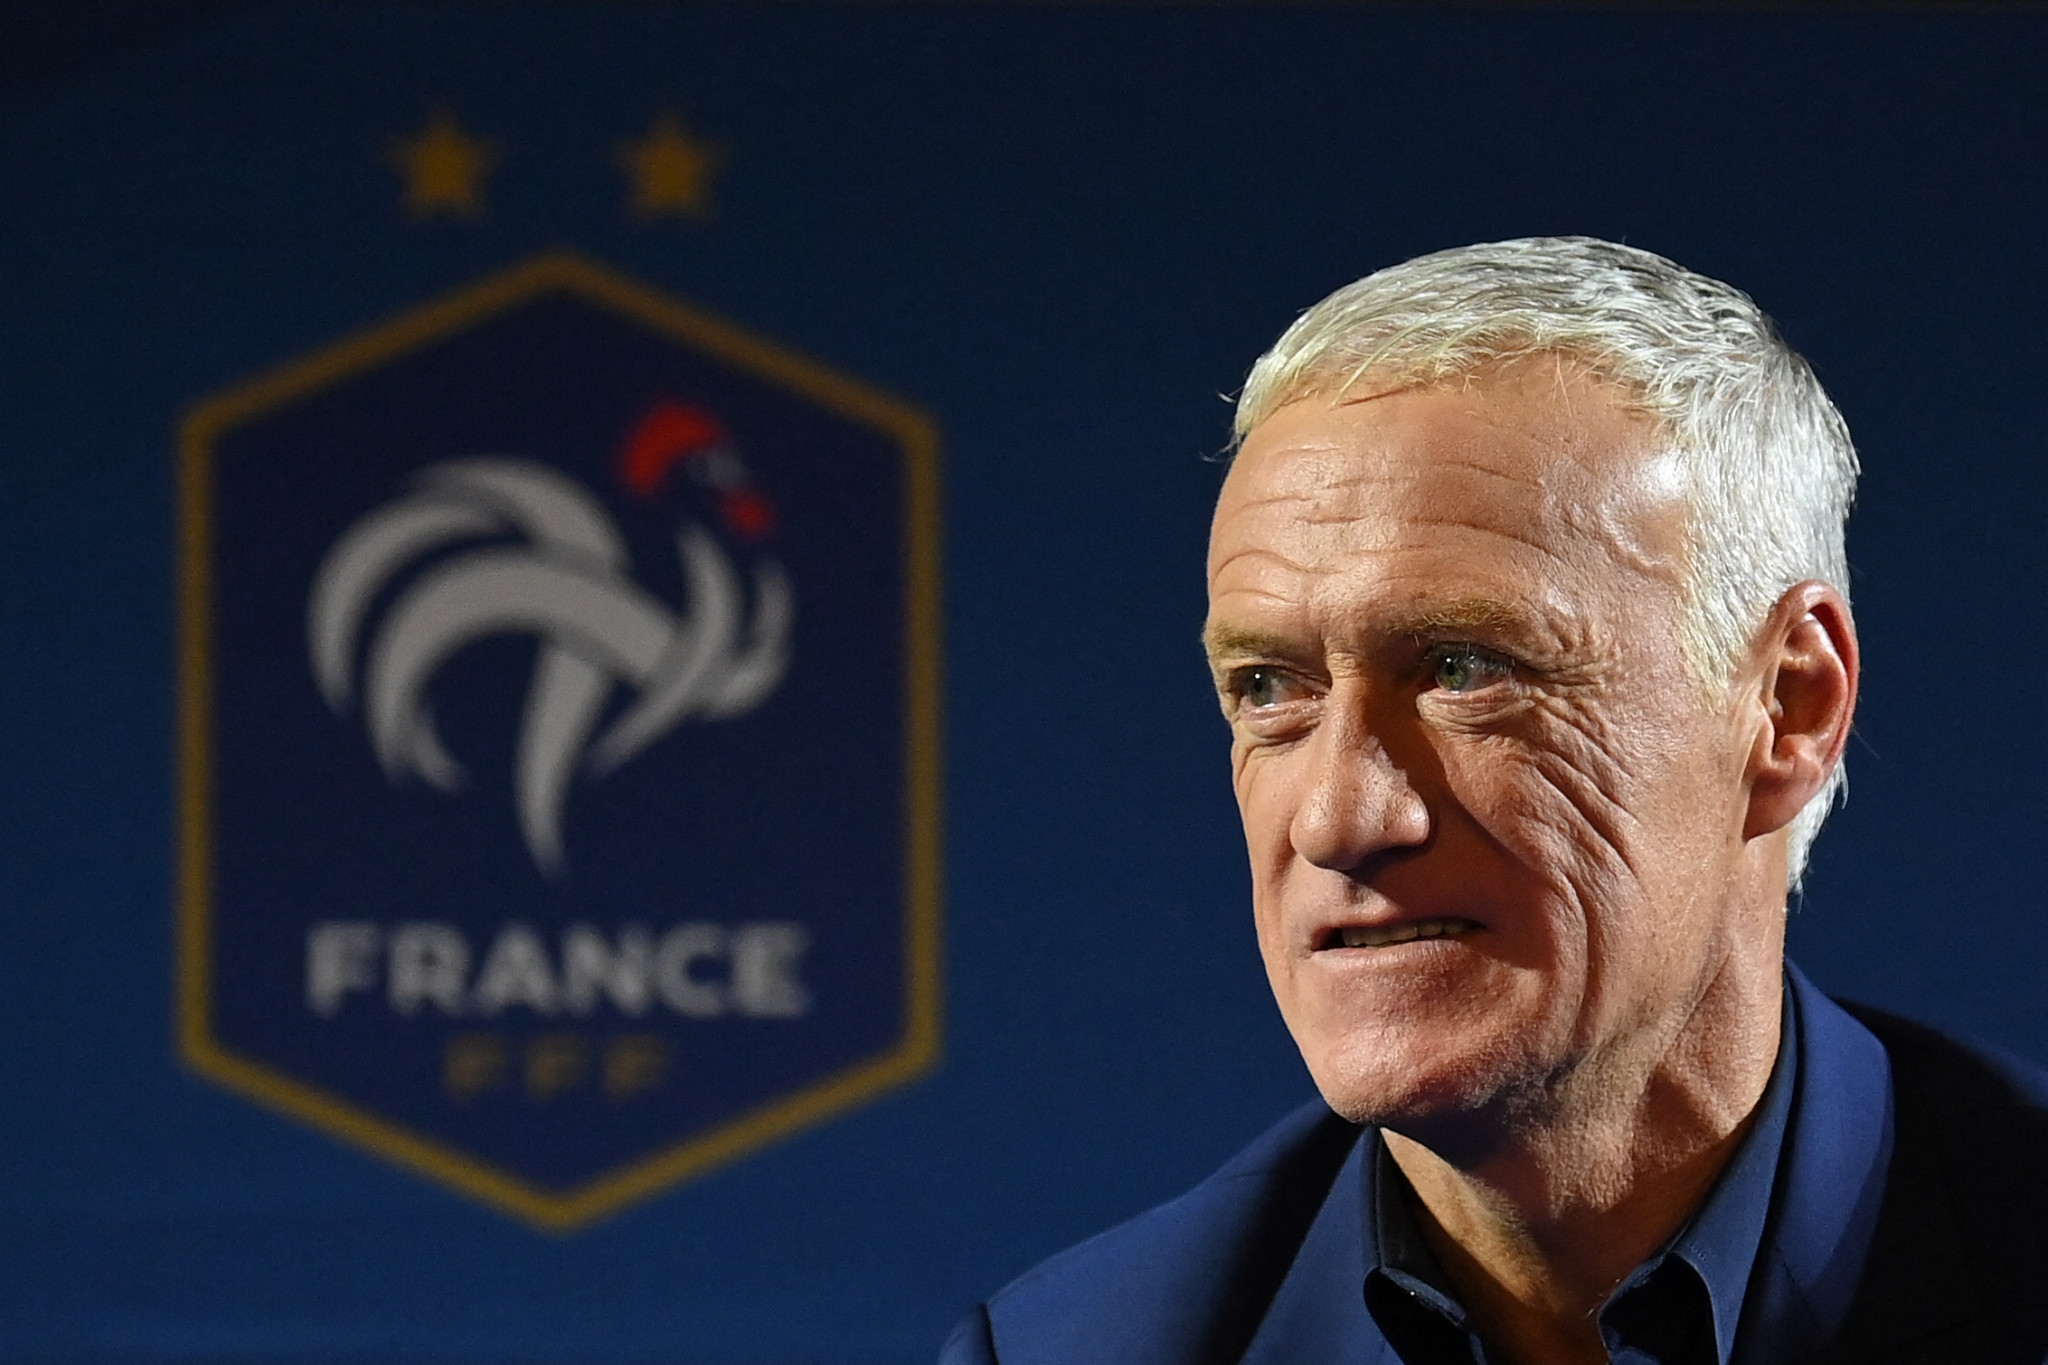 Didier Deschamps backed his players to use their freedom of expression ©Getty Images